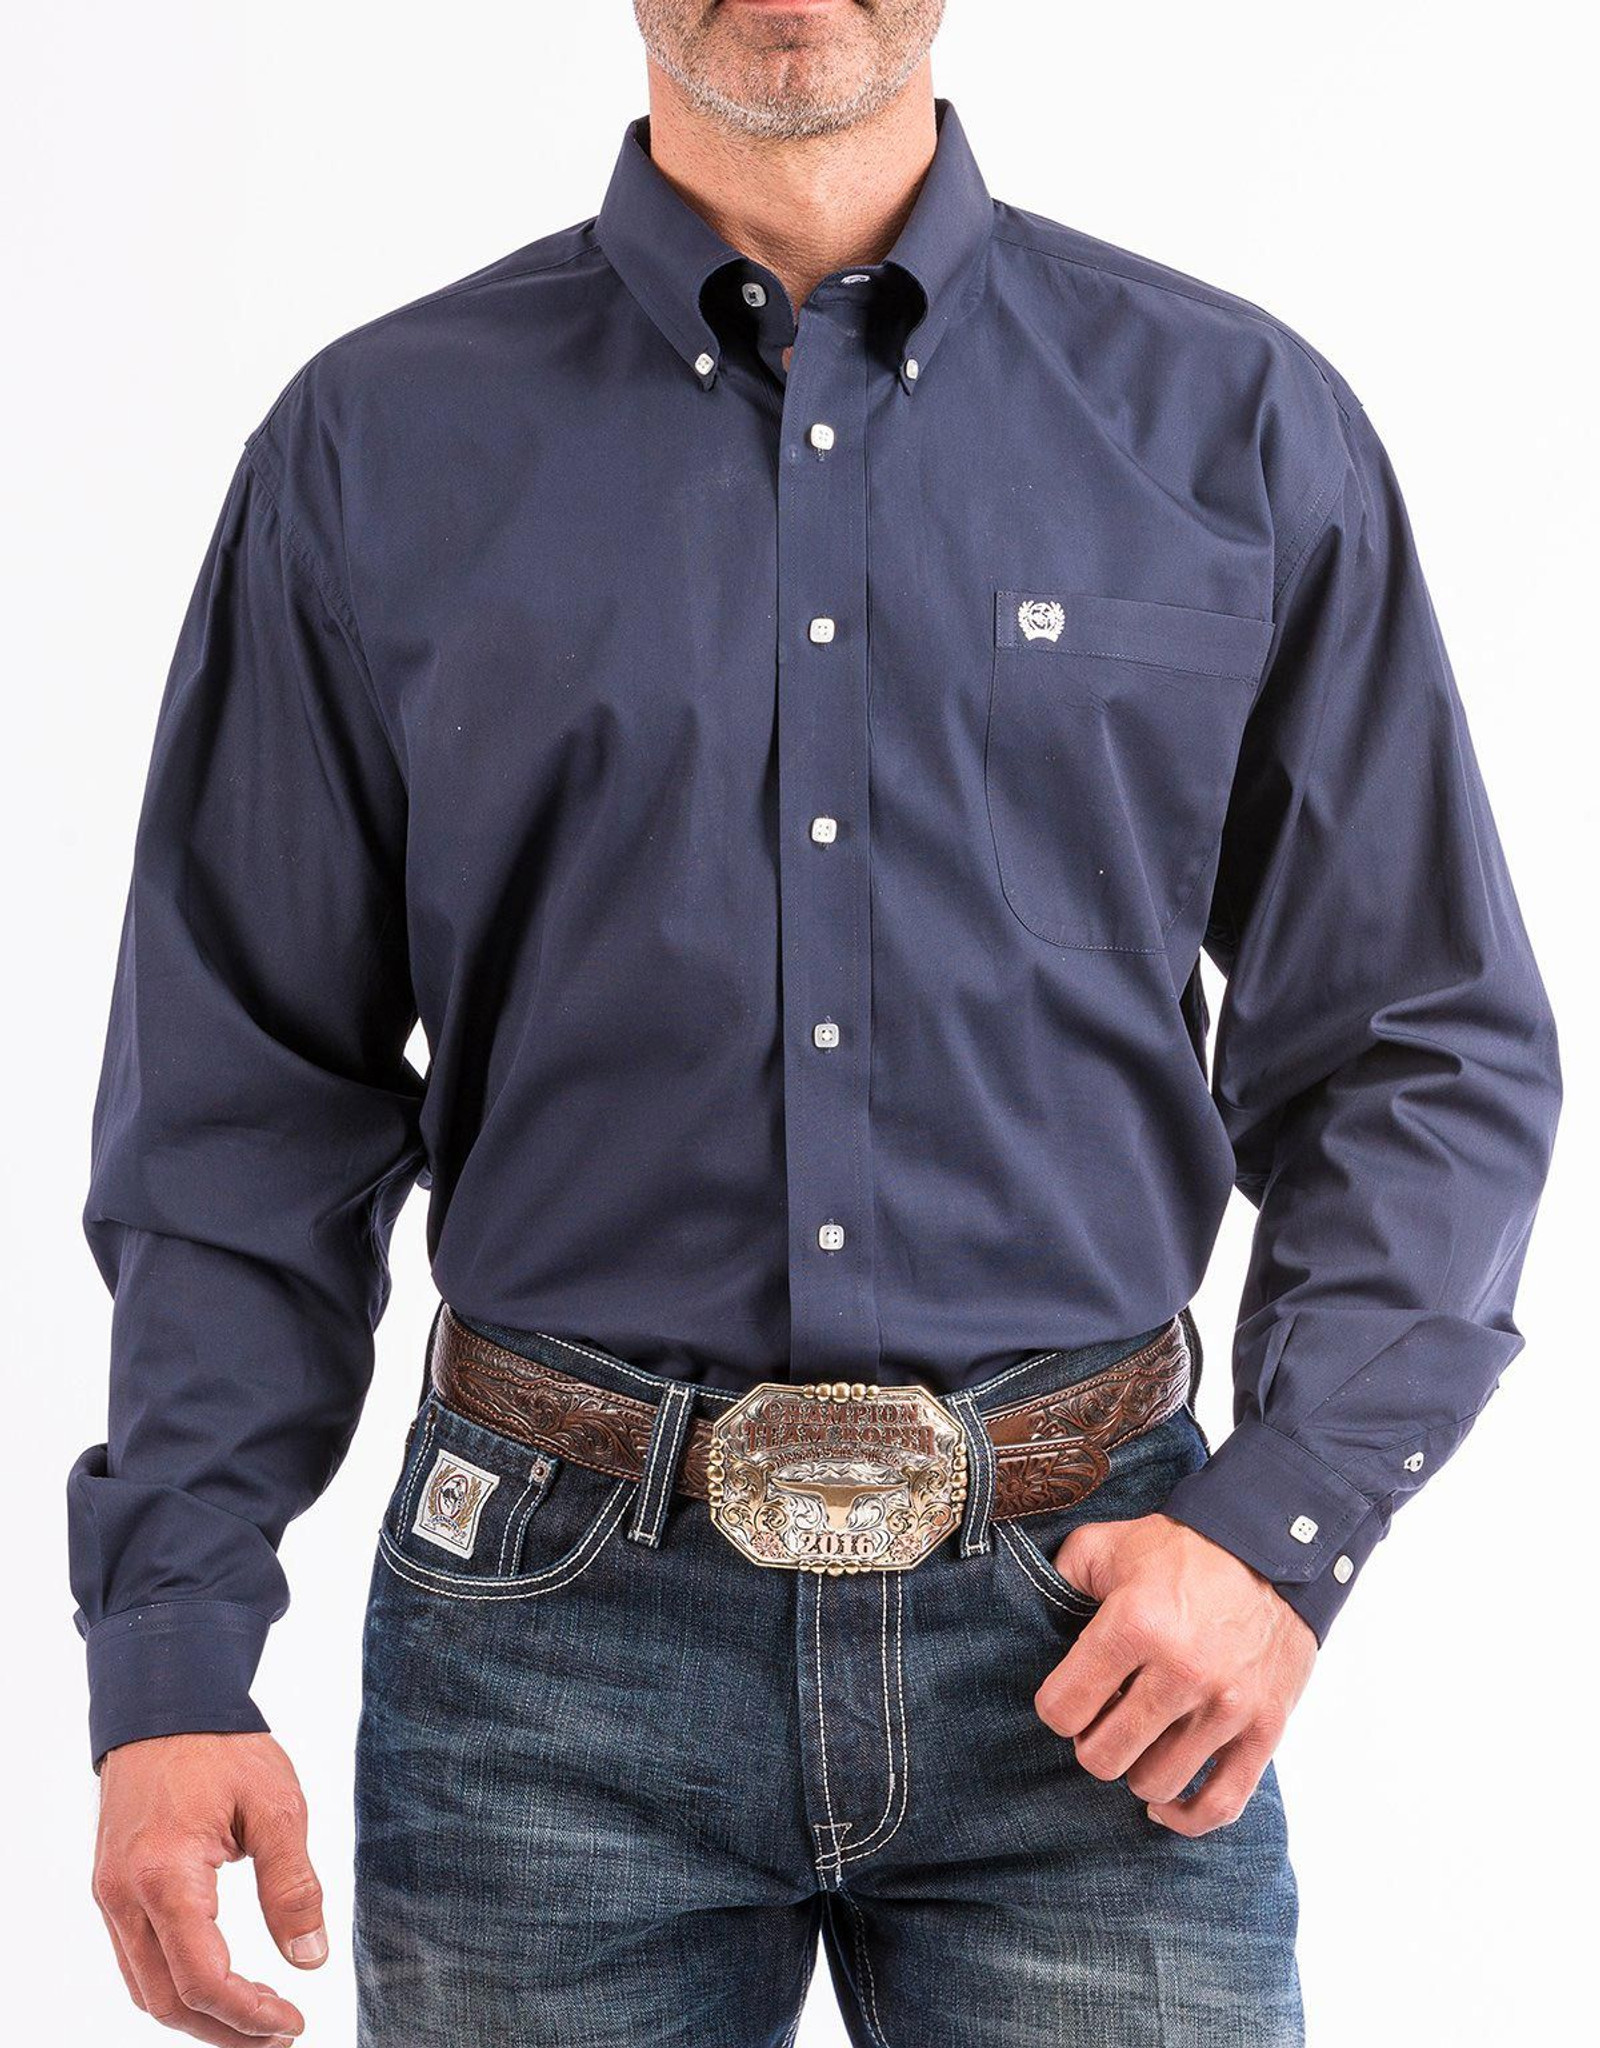 Cinch Navy Blue Shirt for Men from Langston's - Button-Down